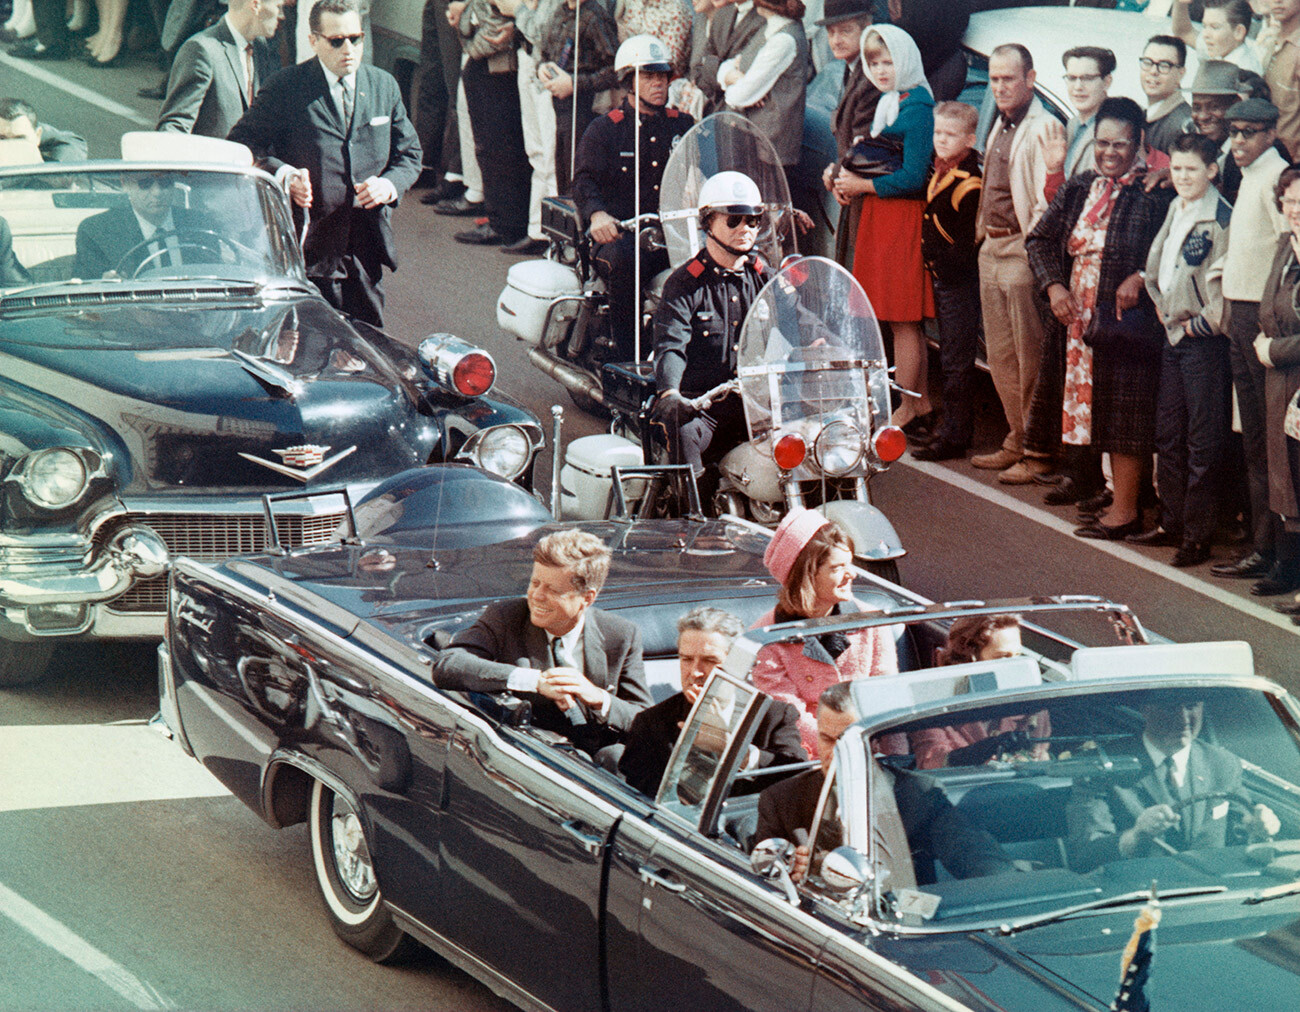 President and Mrs. John F. Kennedy smile at the crowds lining their motorcade route in Dallas, Texas, on November 22, 1963. Minutes later the President was assassinated as his car passed through Dealey Plaza.